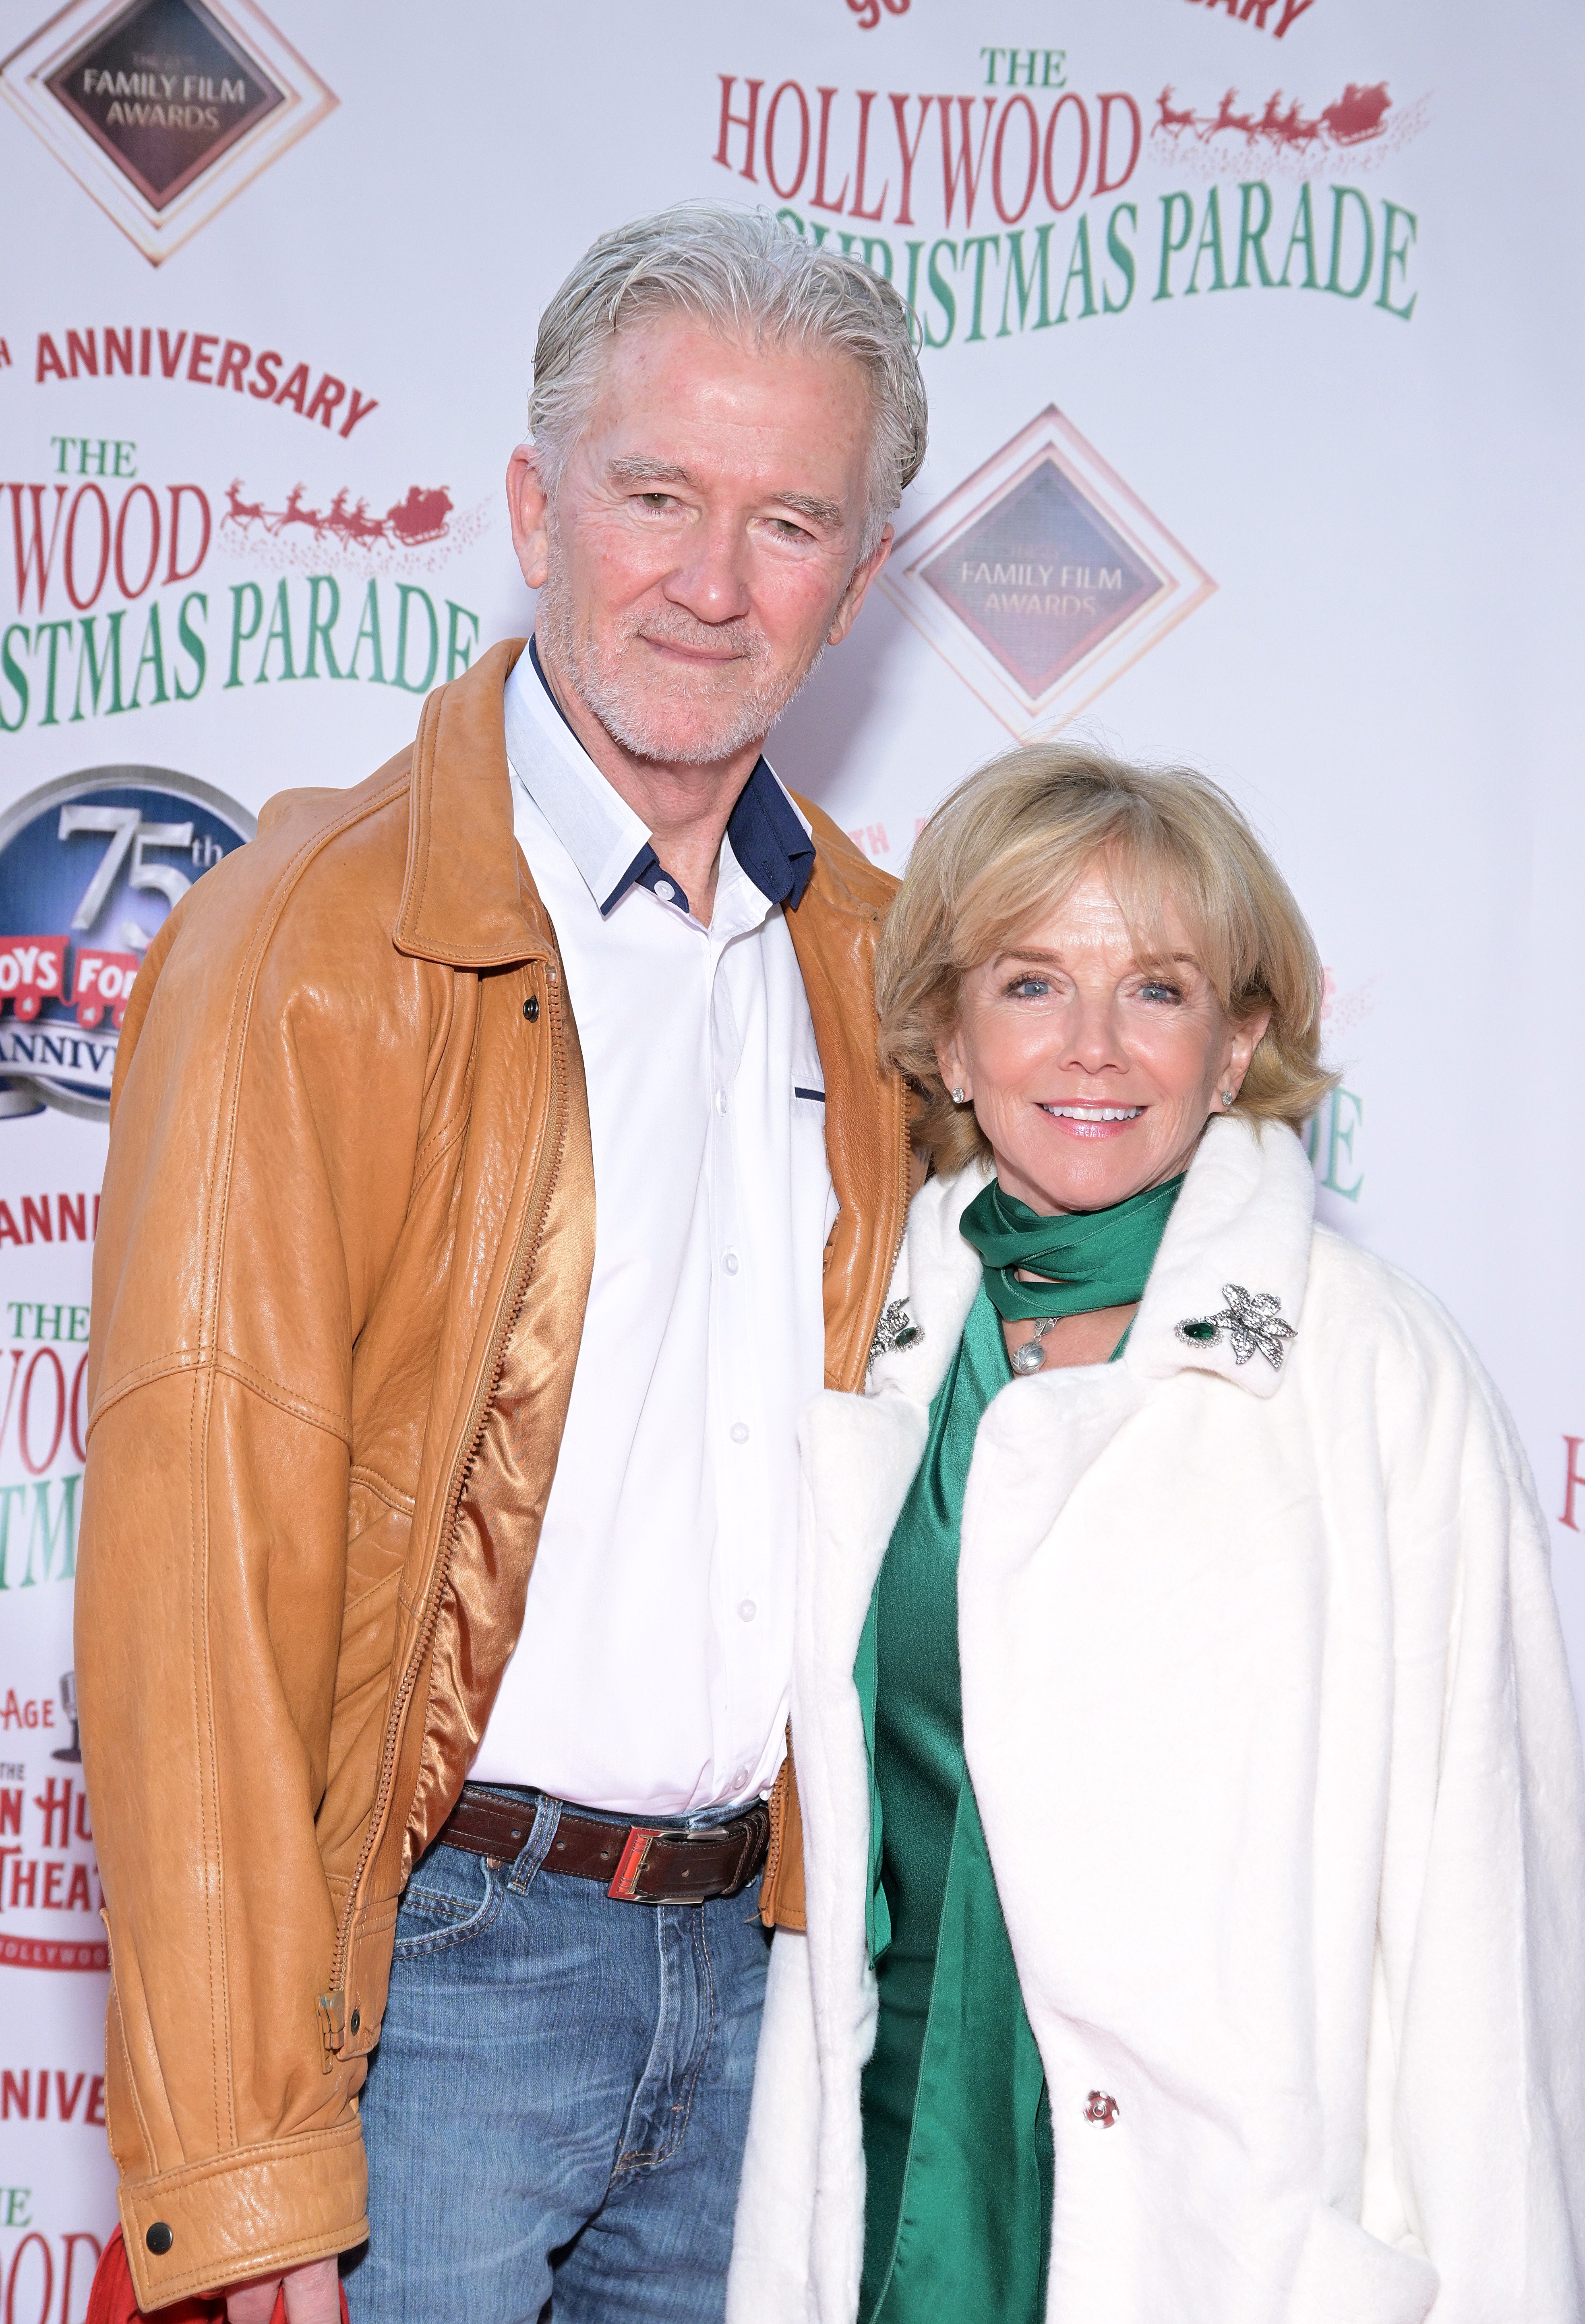 Patrick Duffy and Linda Purl attend the 90th anniversary of the Hollywood Christmas Parade supporting Marine Toys for Tots on November 27, 2022, in Hollywood, California. | Source: Getty Images